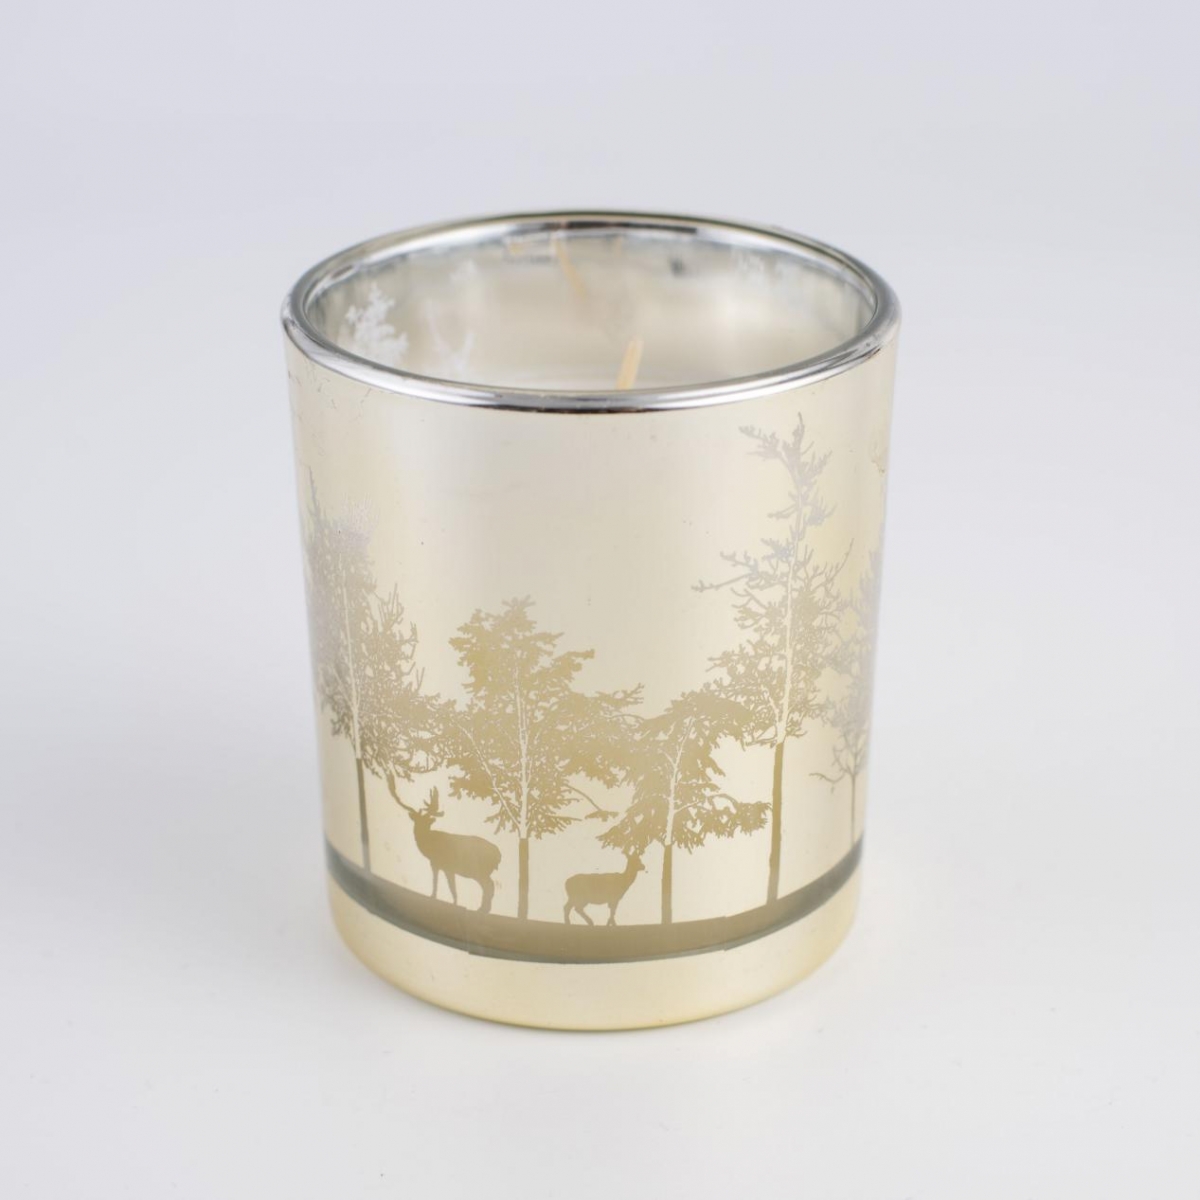 Scented Candles : Winter Forest, Deer ,Engraved Glass,Soy Candles,China Factory ,Good Price-HOWCANDLE-Candles,Scented Candles,Aromatherapy Candles,Soy Candles,Vegan Candles,Jar Candles,Pillar Candles,Candle Gift Sets,Essential Oils,Reed Diffuser,Candle Holder,